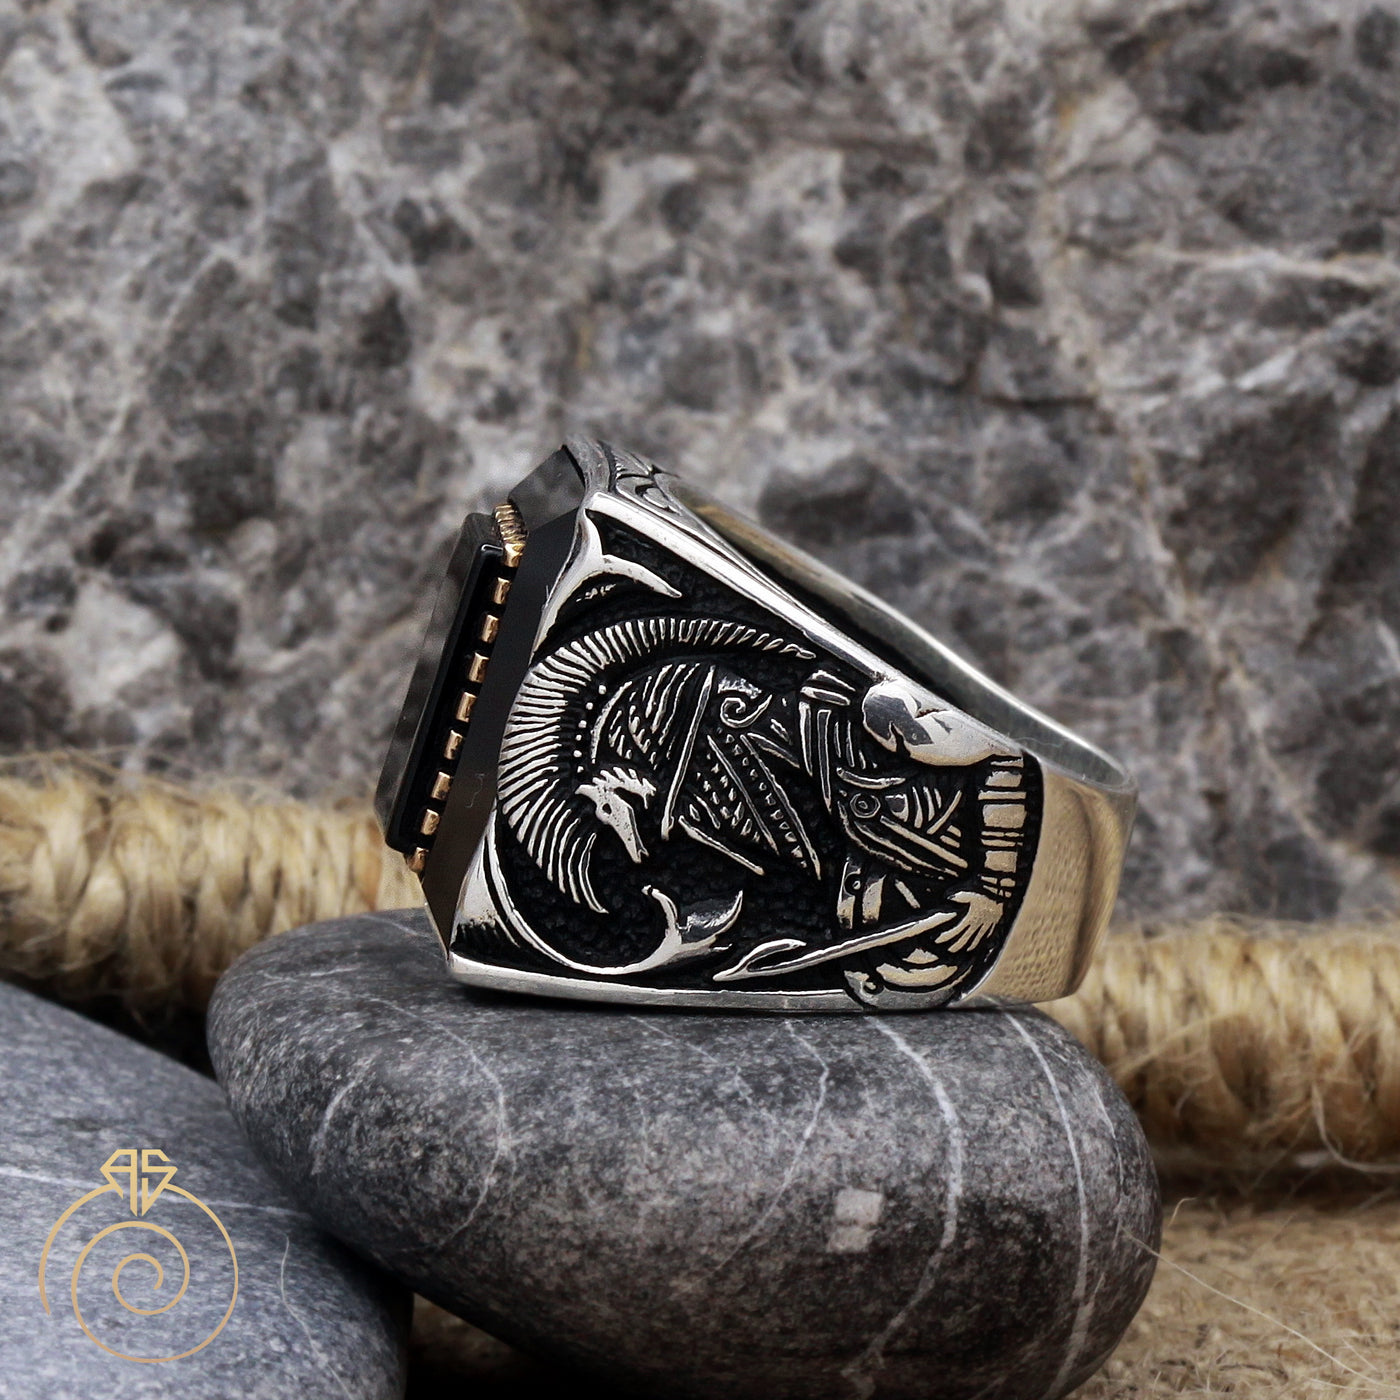 Unique Designs and Styles of Men's Silver Rings | OrlaSilver